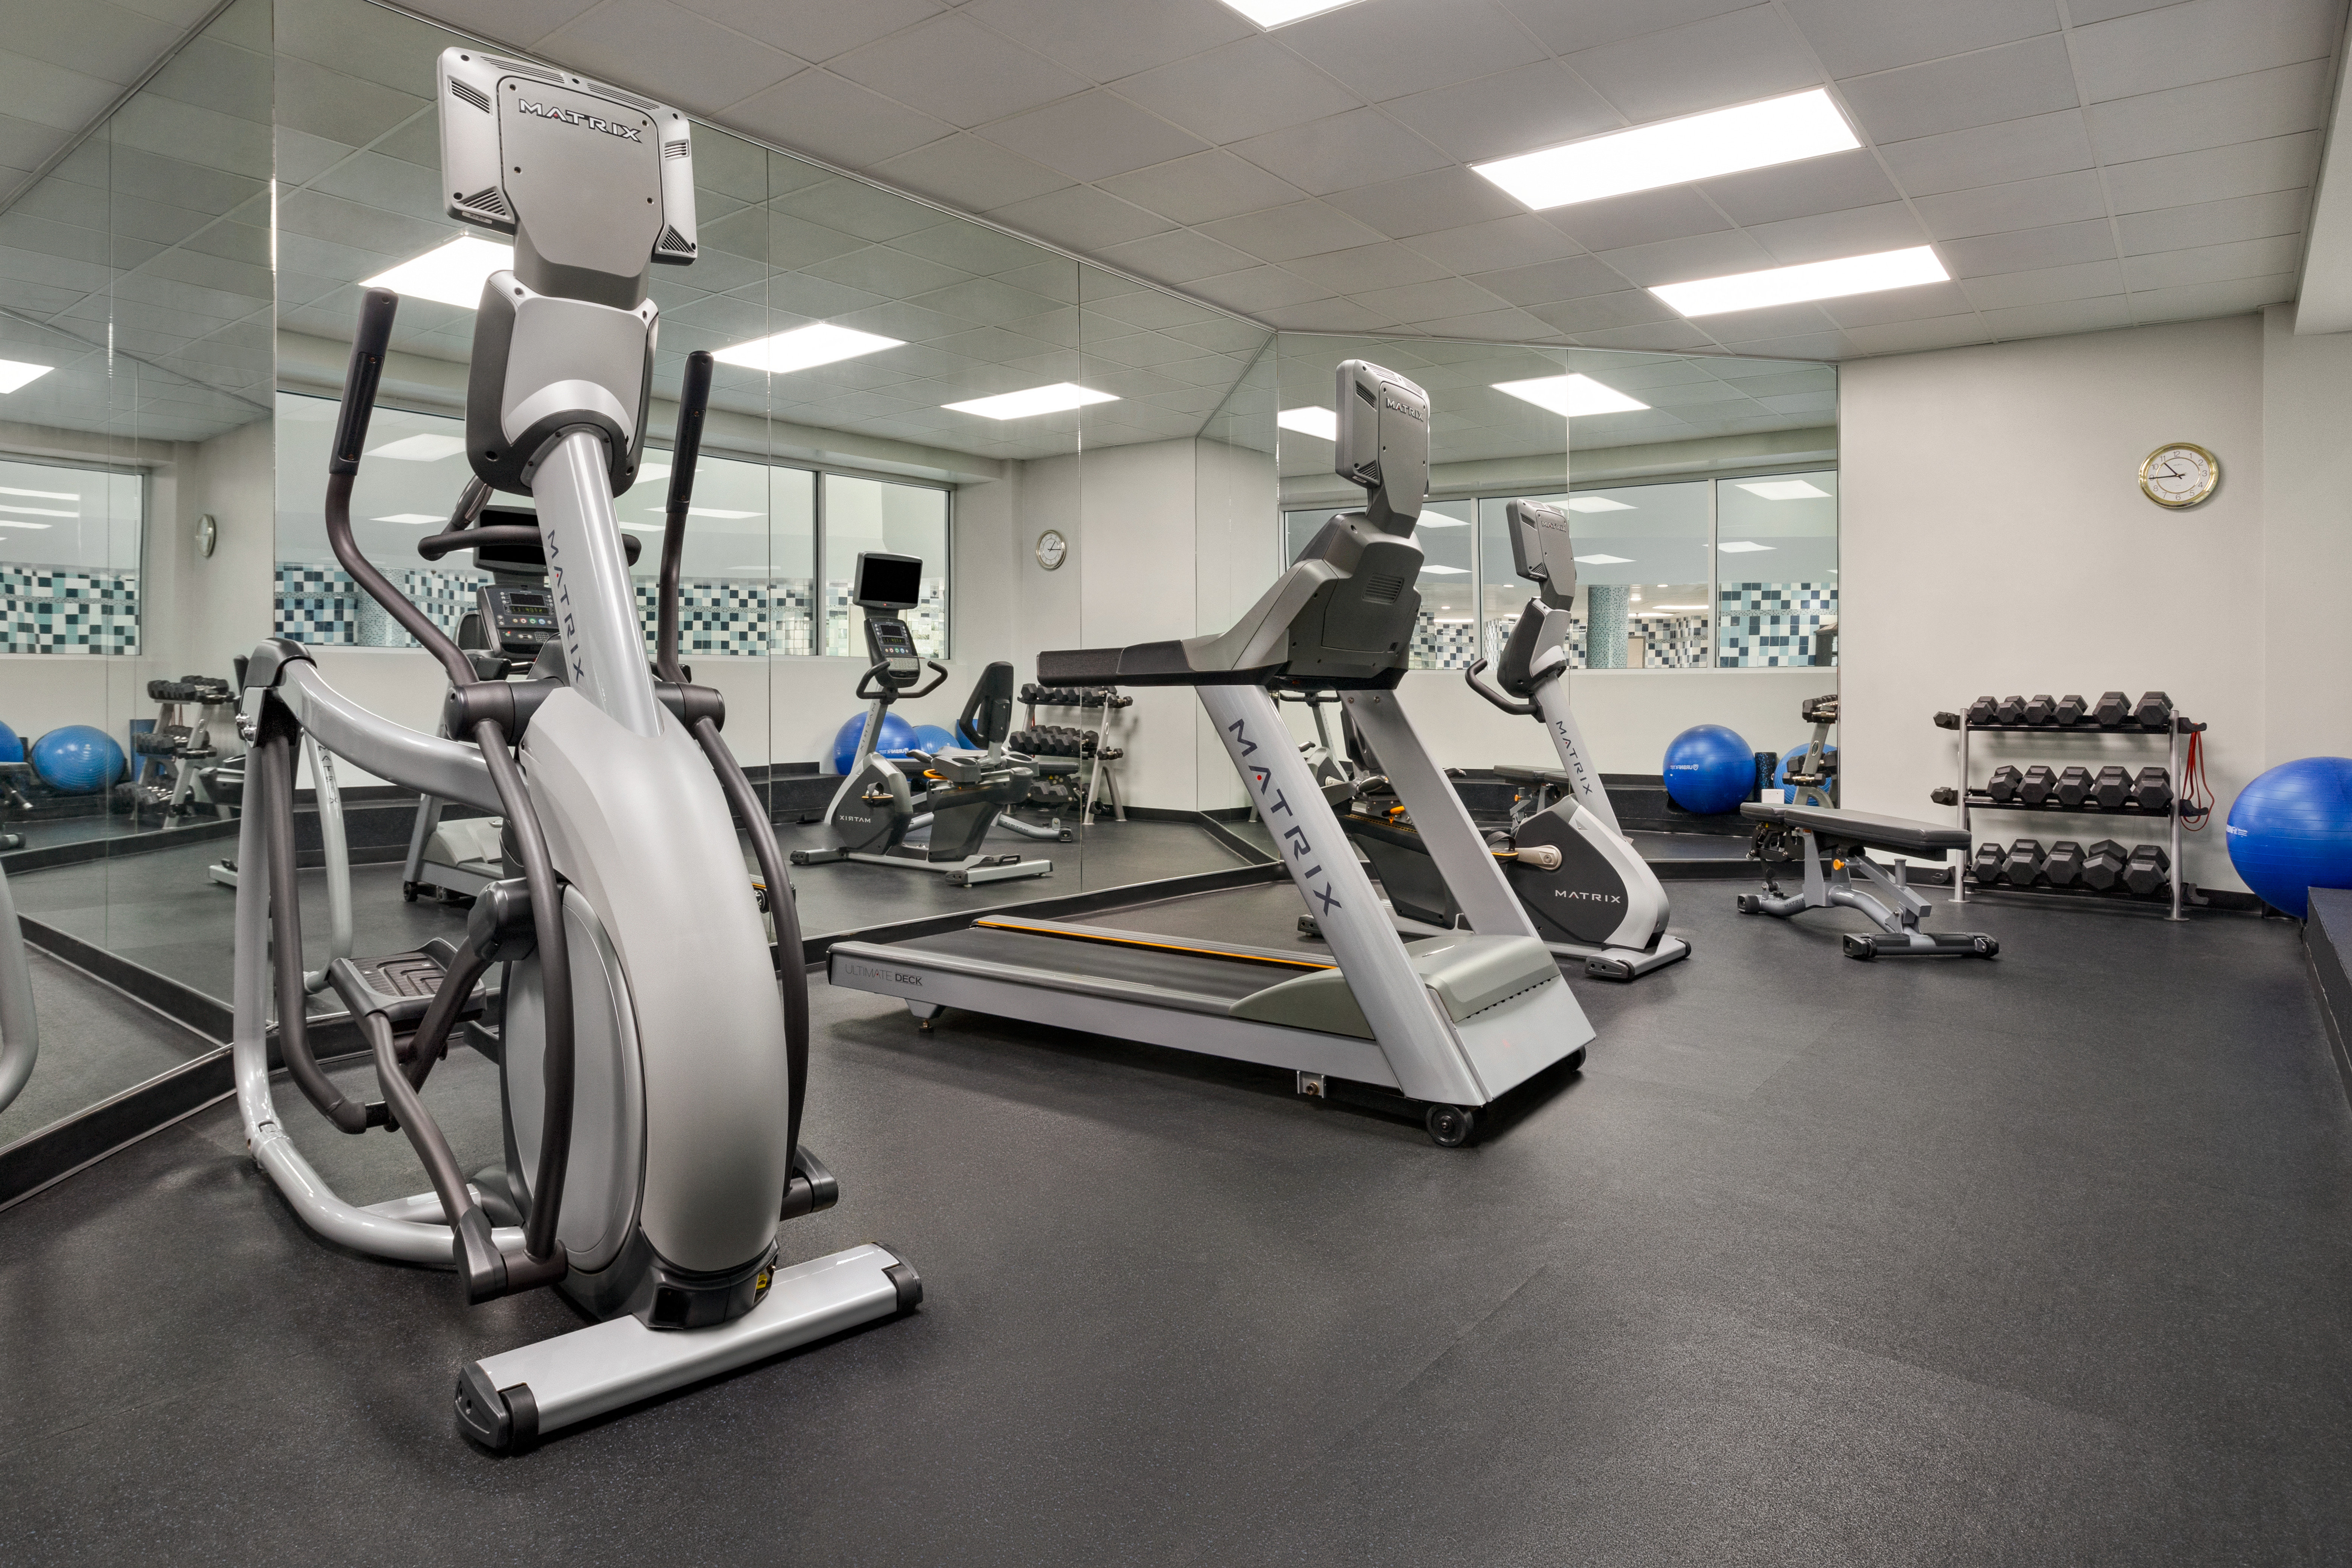 Continue your workout regimen in our Fitness Center.